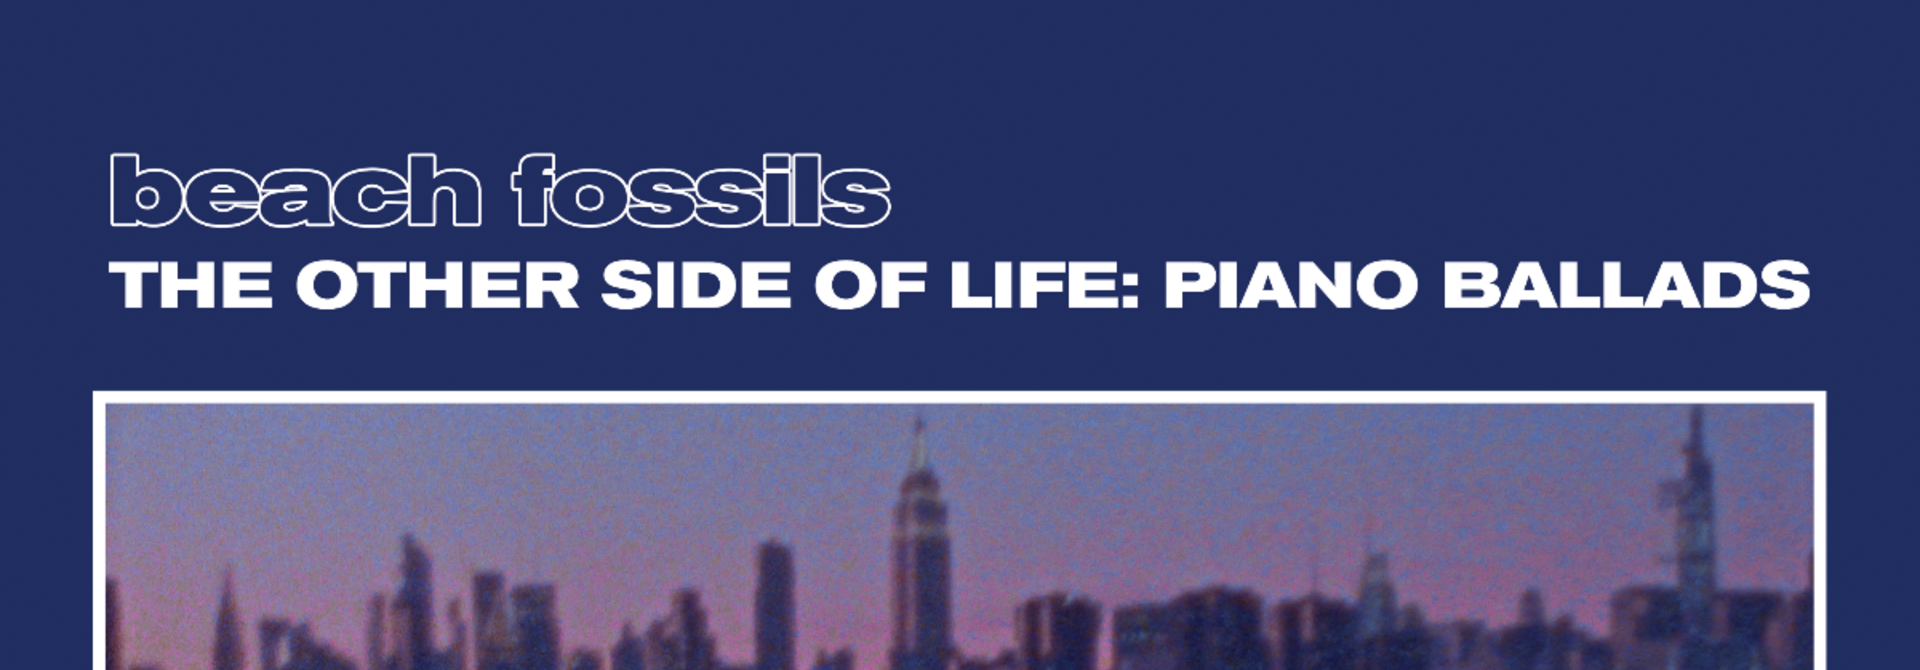 Beach Fossils • The Other Side of Life : Piano Ballads (édition couleur "deep sea")